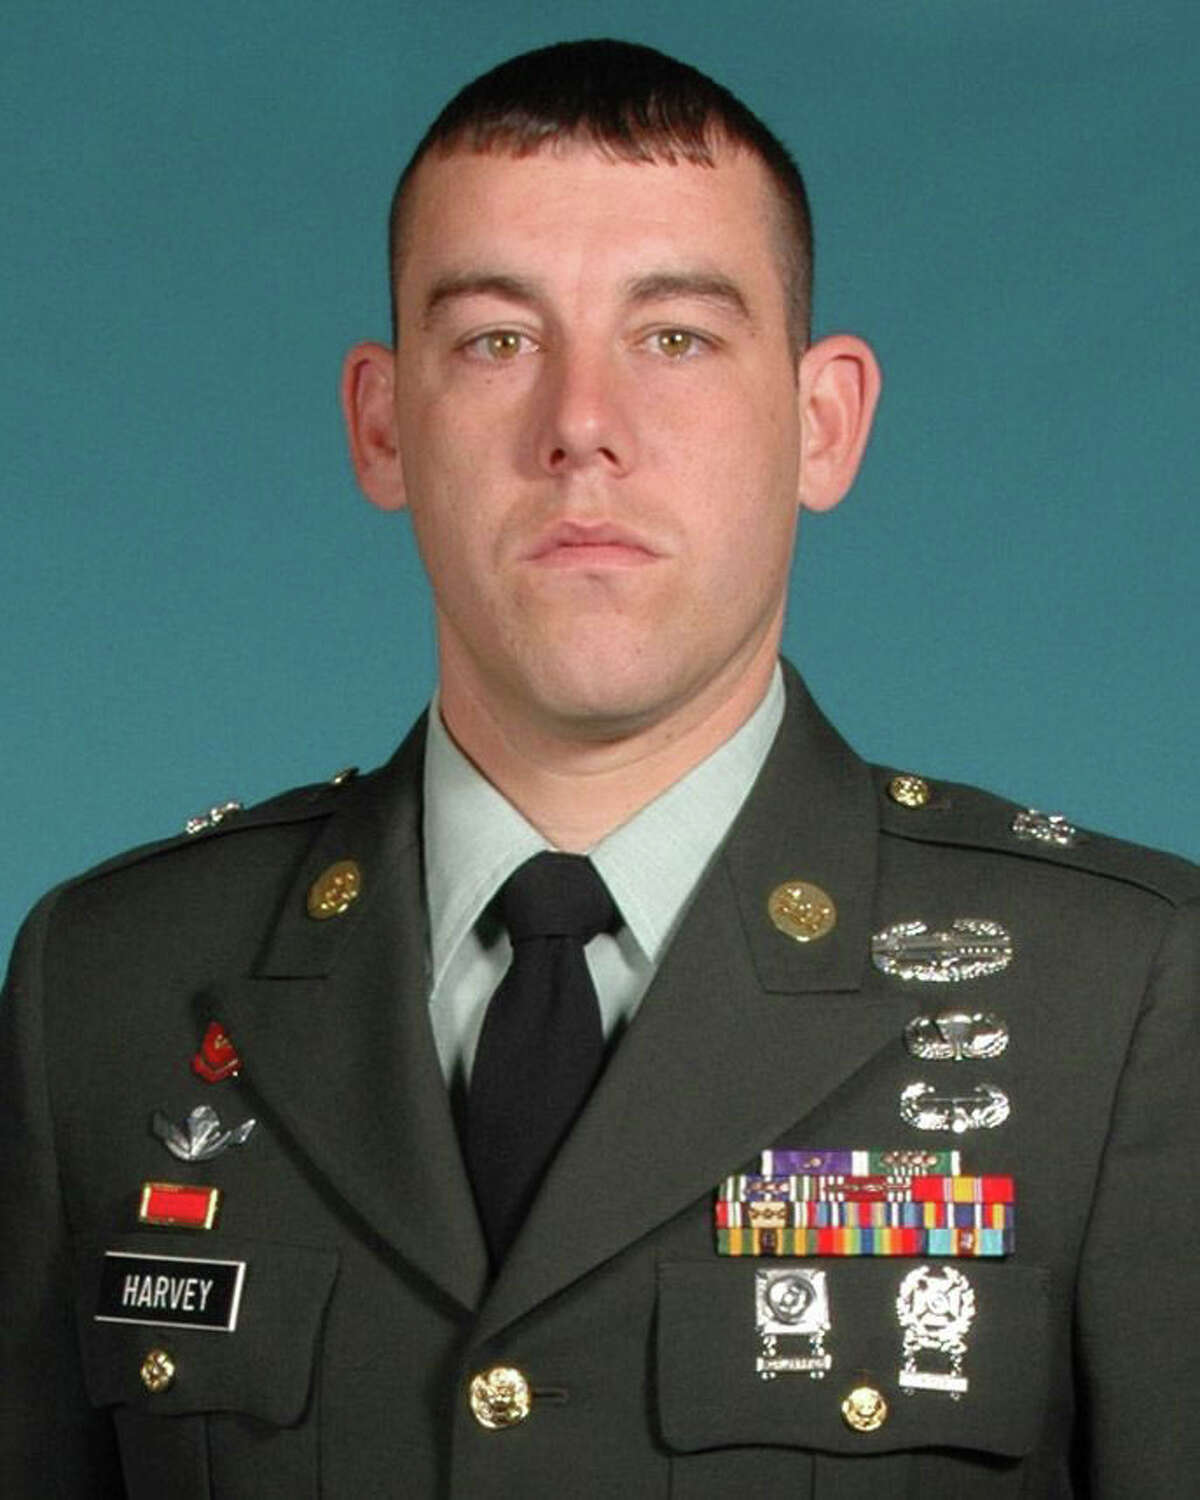 Matthew Harvey, a 29-year-old engineer sergeant from Cypress, was killed in an auto accident Sunday while serving on temporary assignment in Stuttgart, Germany, military officials announced. He was among three soldiers from the 10th Special Forces Group of Fort Carson, Colo. who were in the accident. ( Courtesy Photo )